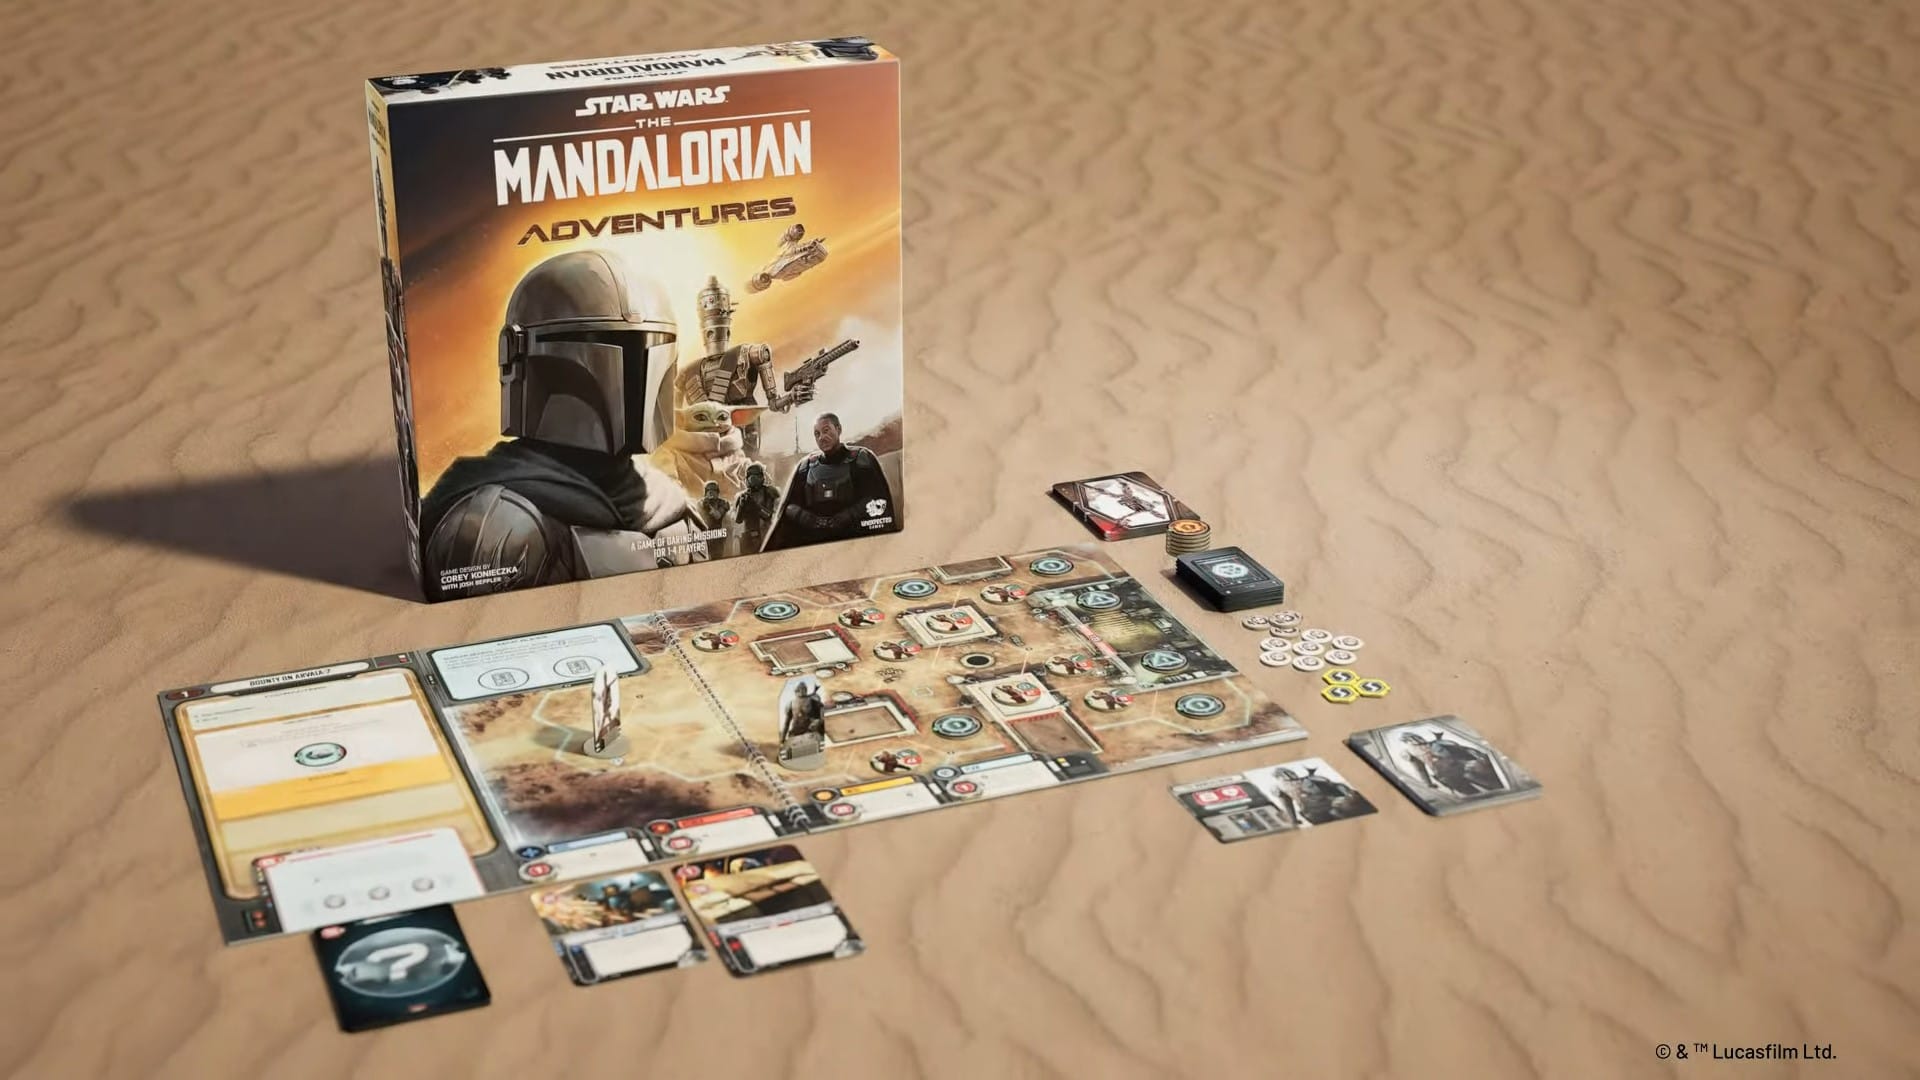 A promo image of The Mandalorian Adventures board game, showcasing the box and its contents on a desert background.